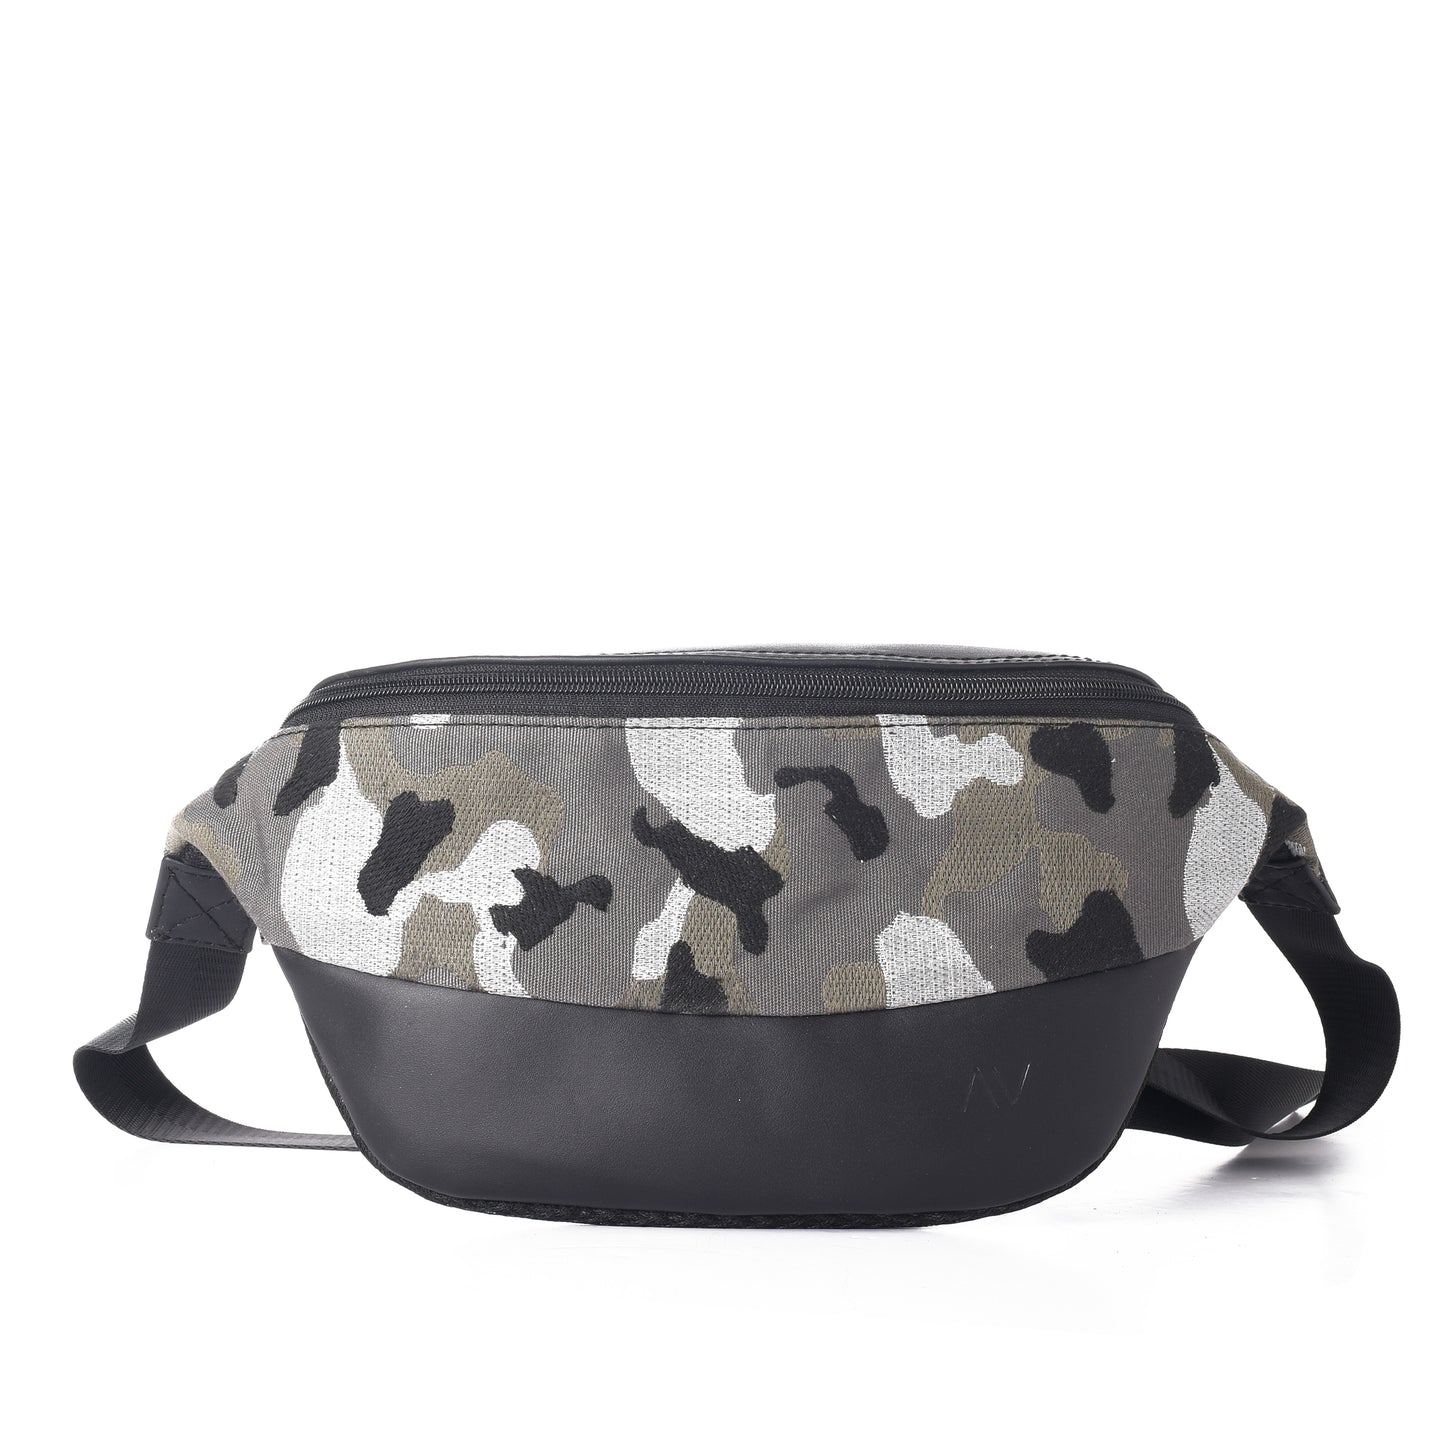 Fanny pack - Black with Olive Army pattern